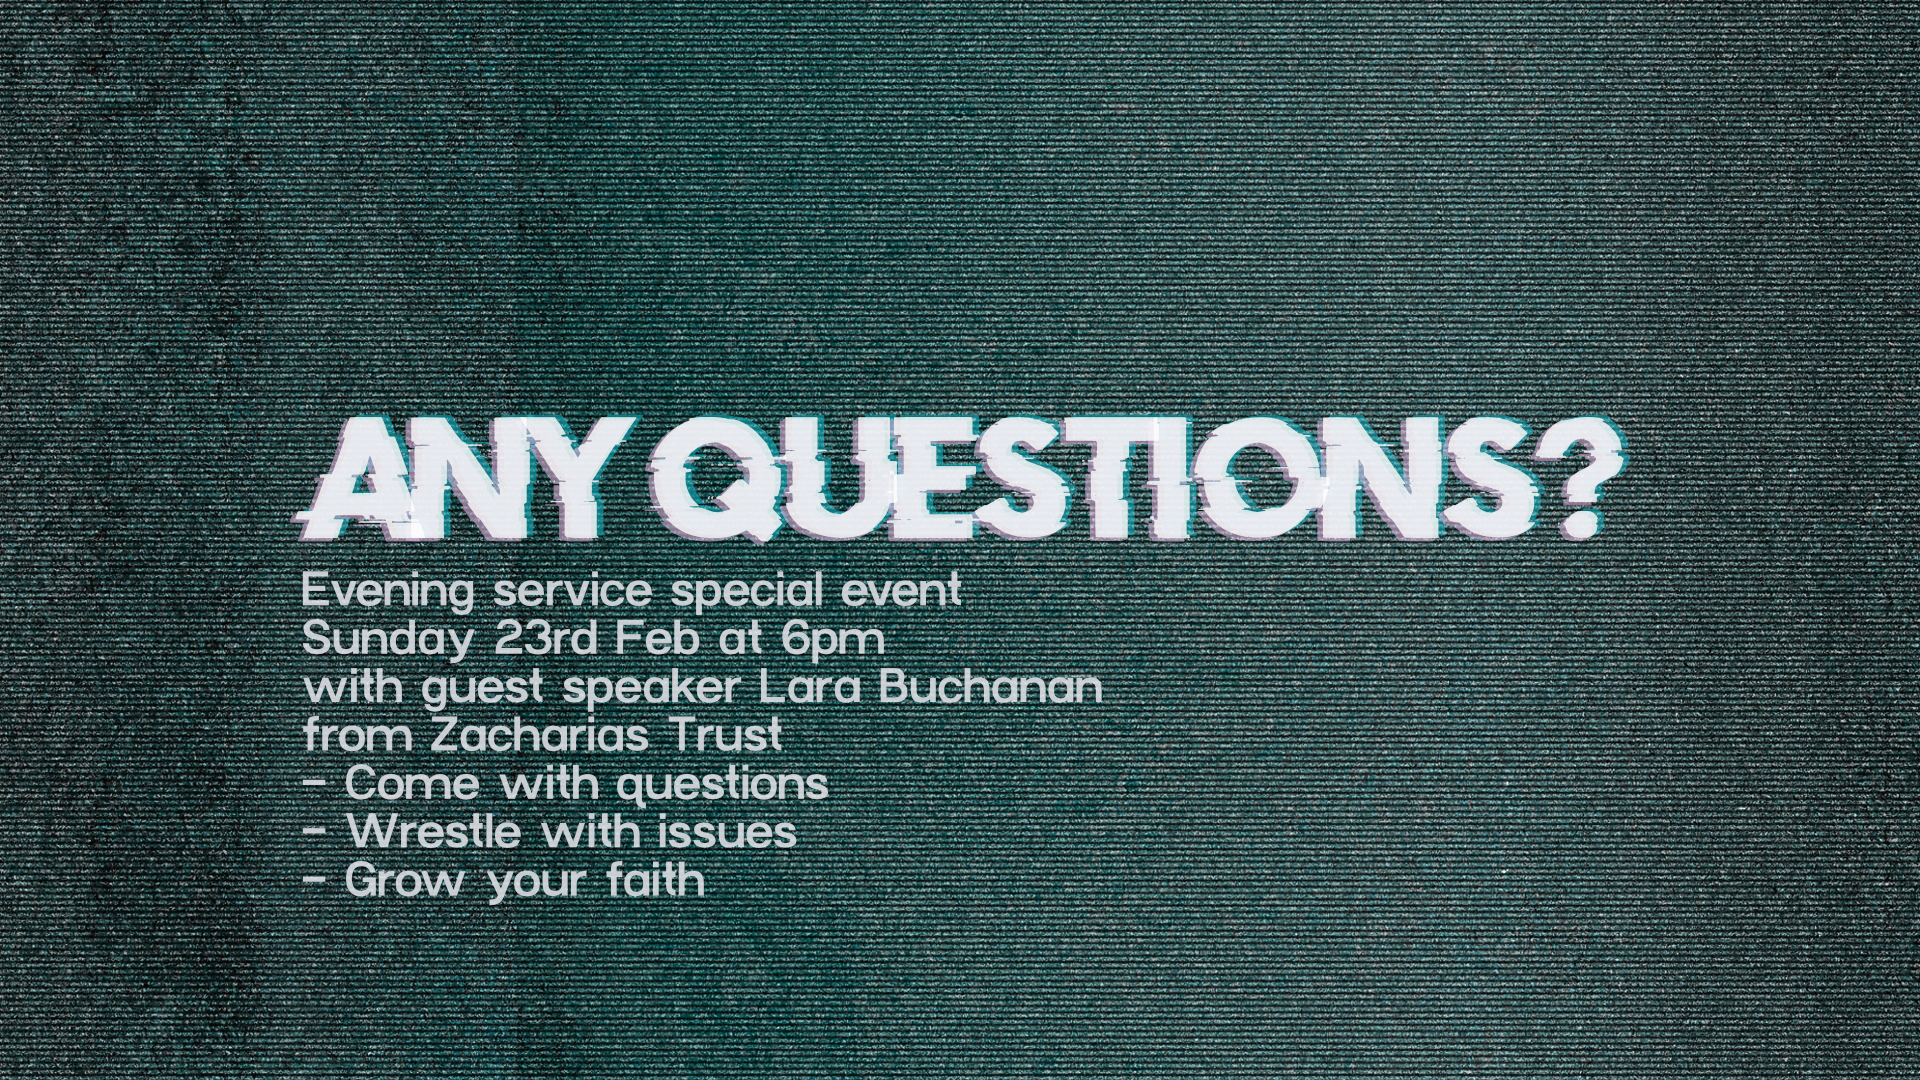 Any Questions? Evening Service special event on Sunday 23rd February at 6pm with guest speaker Lara Buchanan from Zacharias Trust. Come with Questions. Wrestle with issues. Grow your faith.